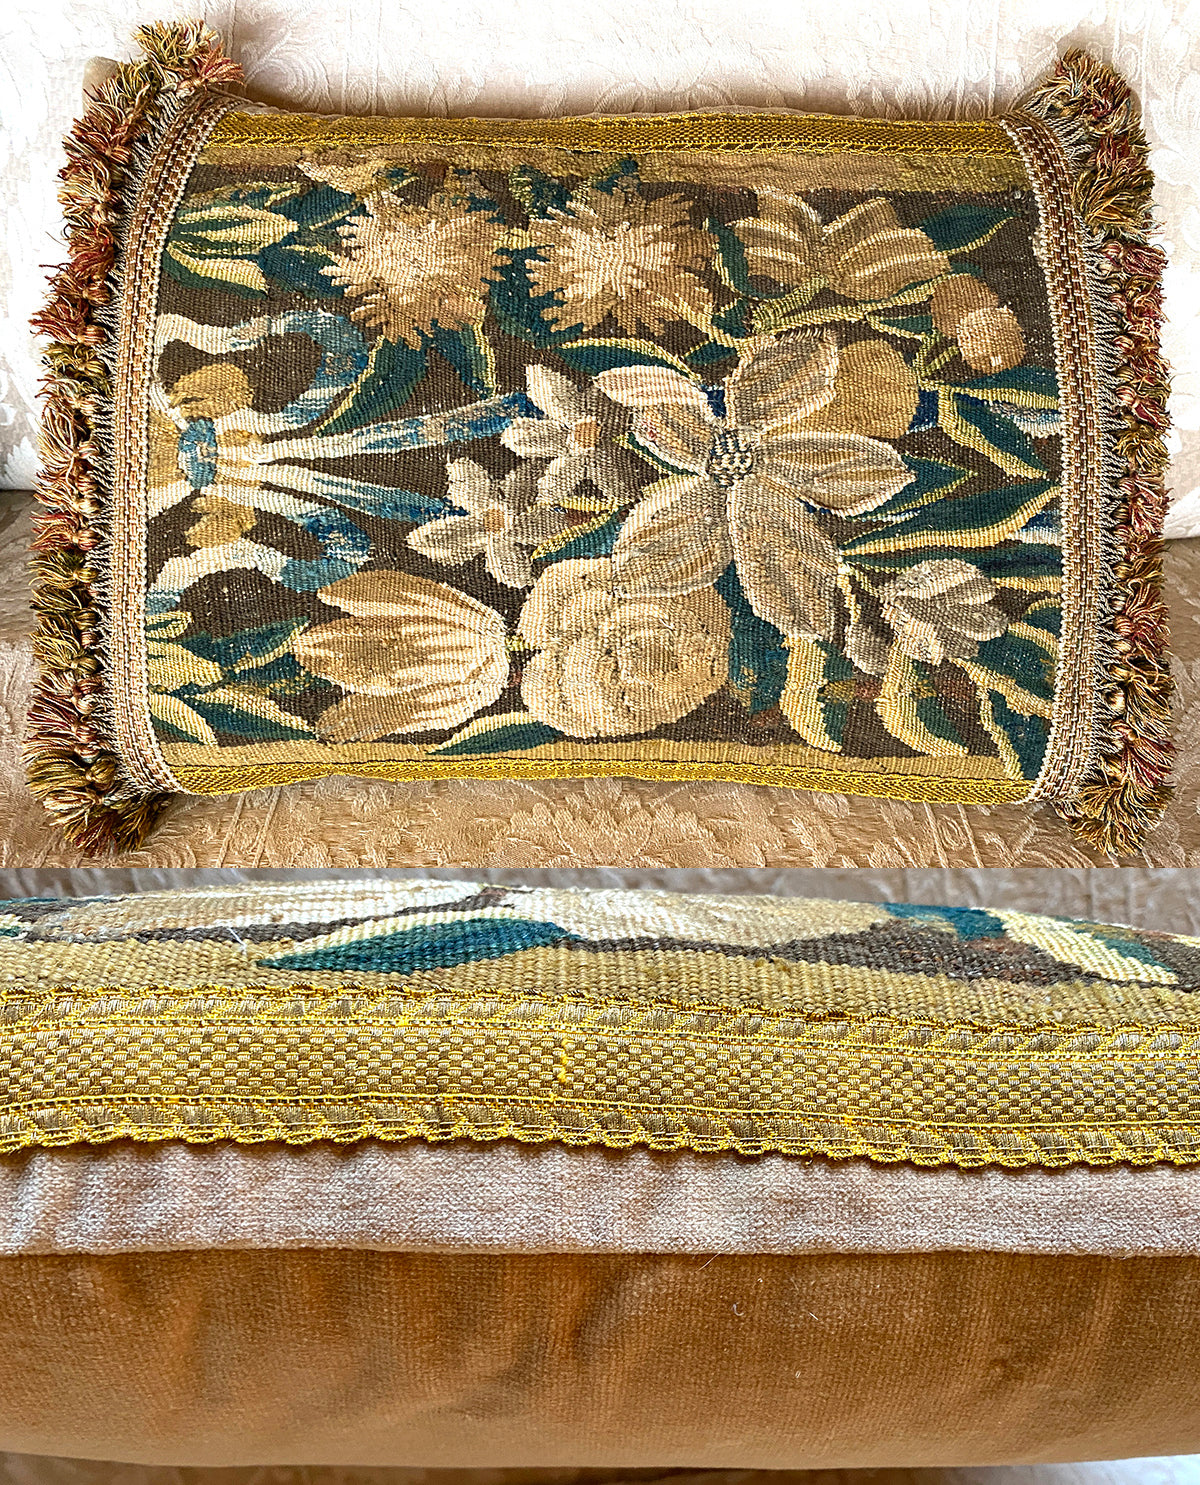 Antique 18th Century French or Flemish Verdure Tapestry Fragment